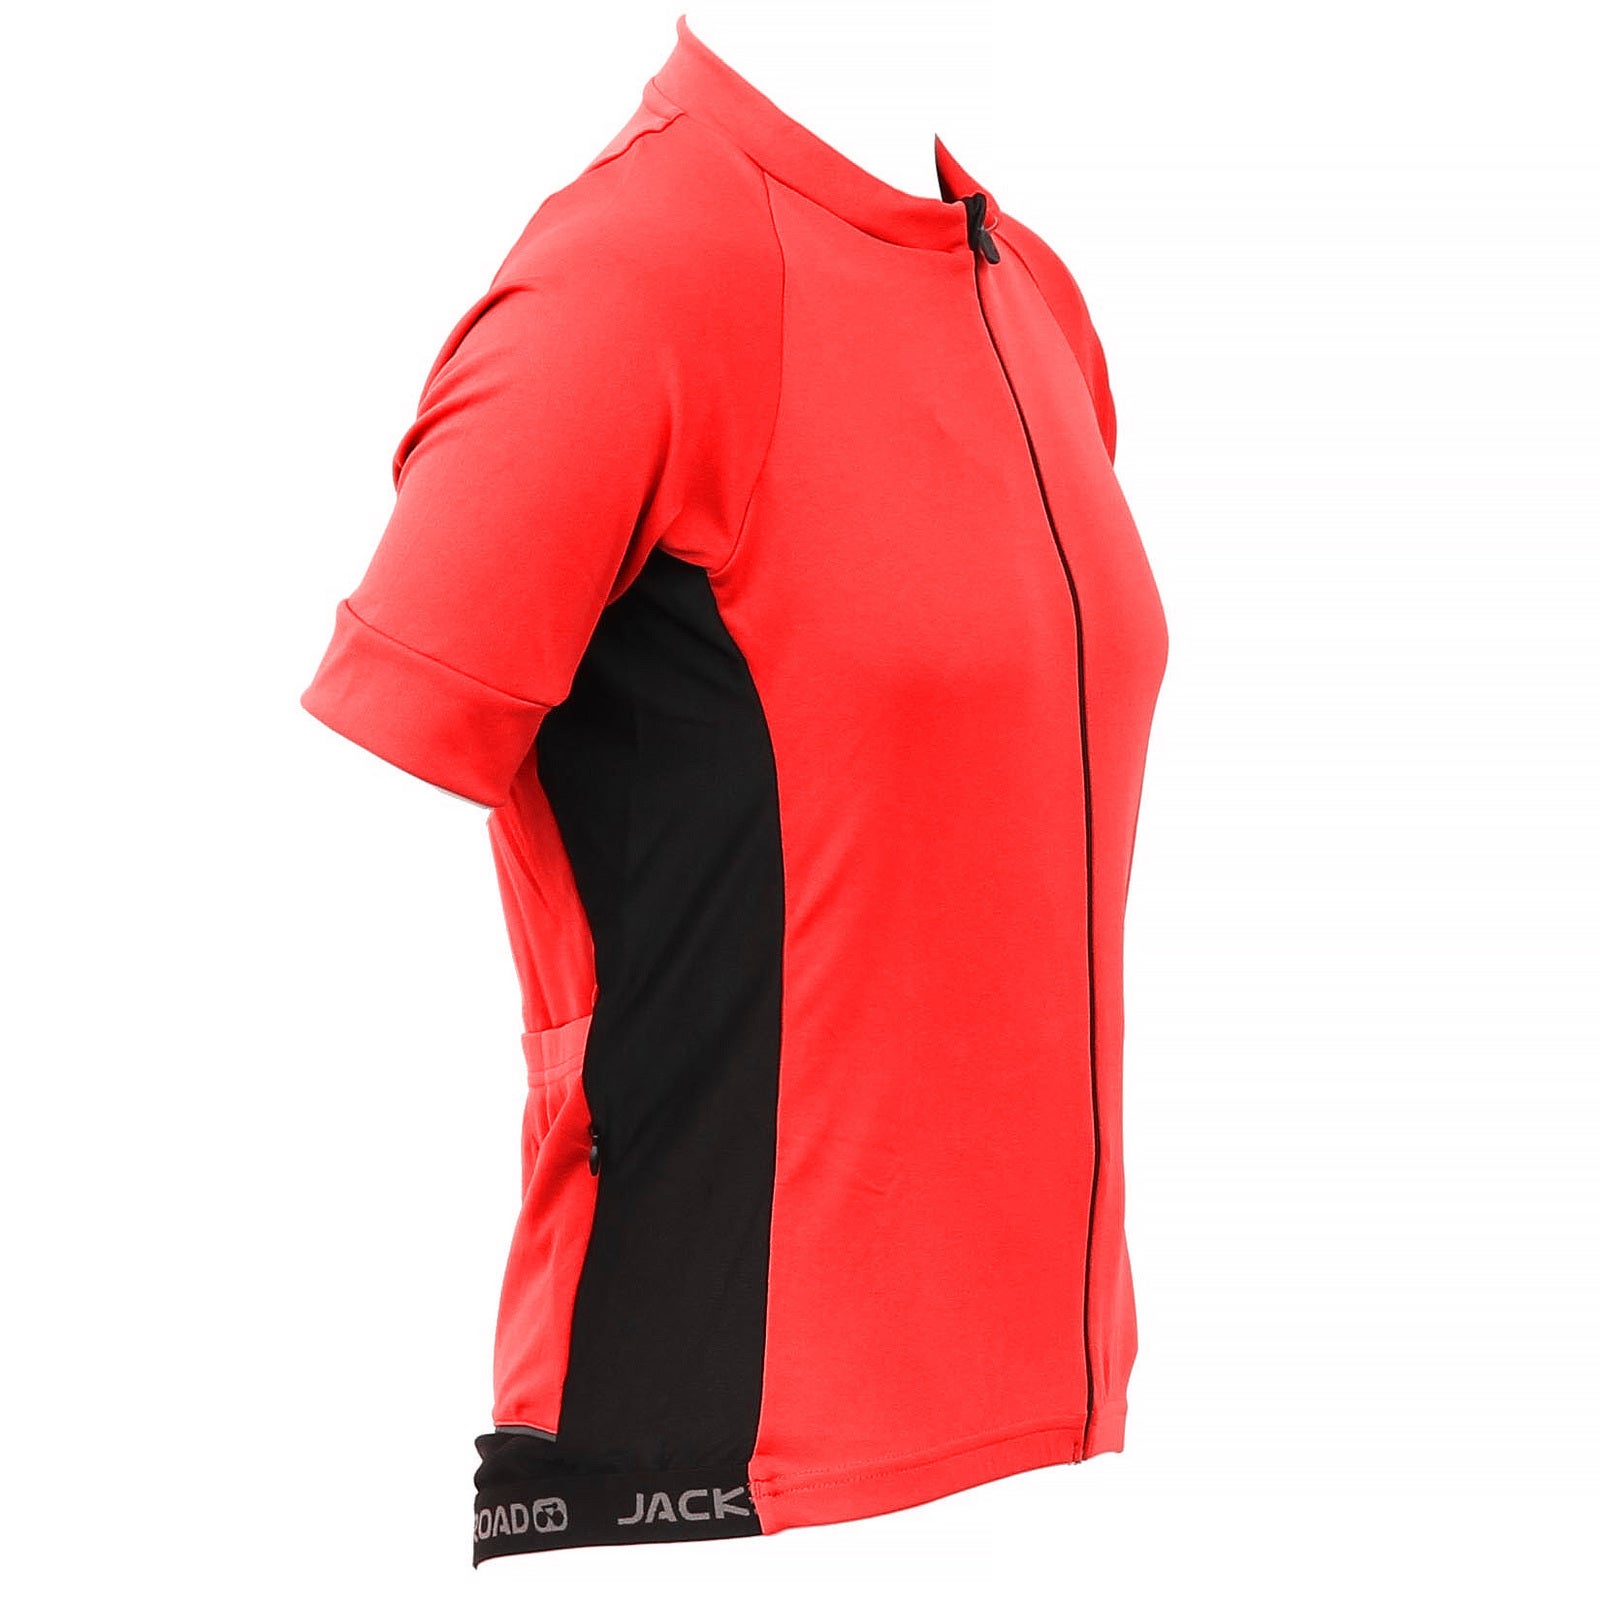 Jackbroad Premium Quality Cycling Short Sleeves Jersey Red